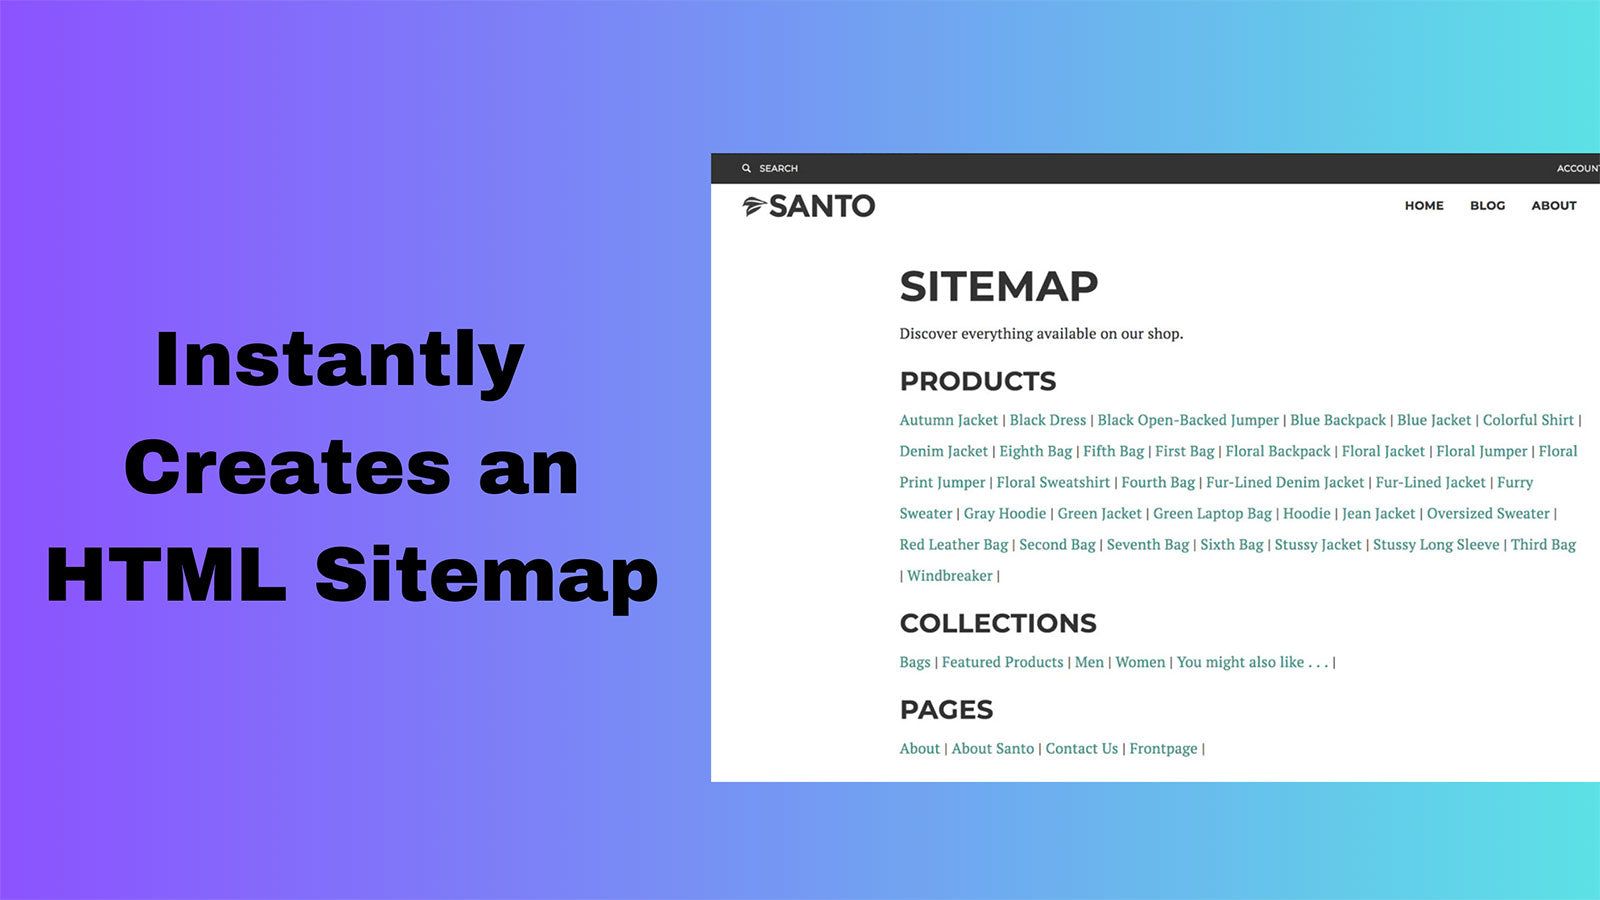 Instantly generates a sitemap increase SEO search engine traffic